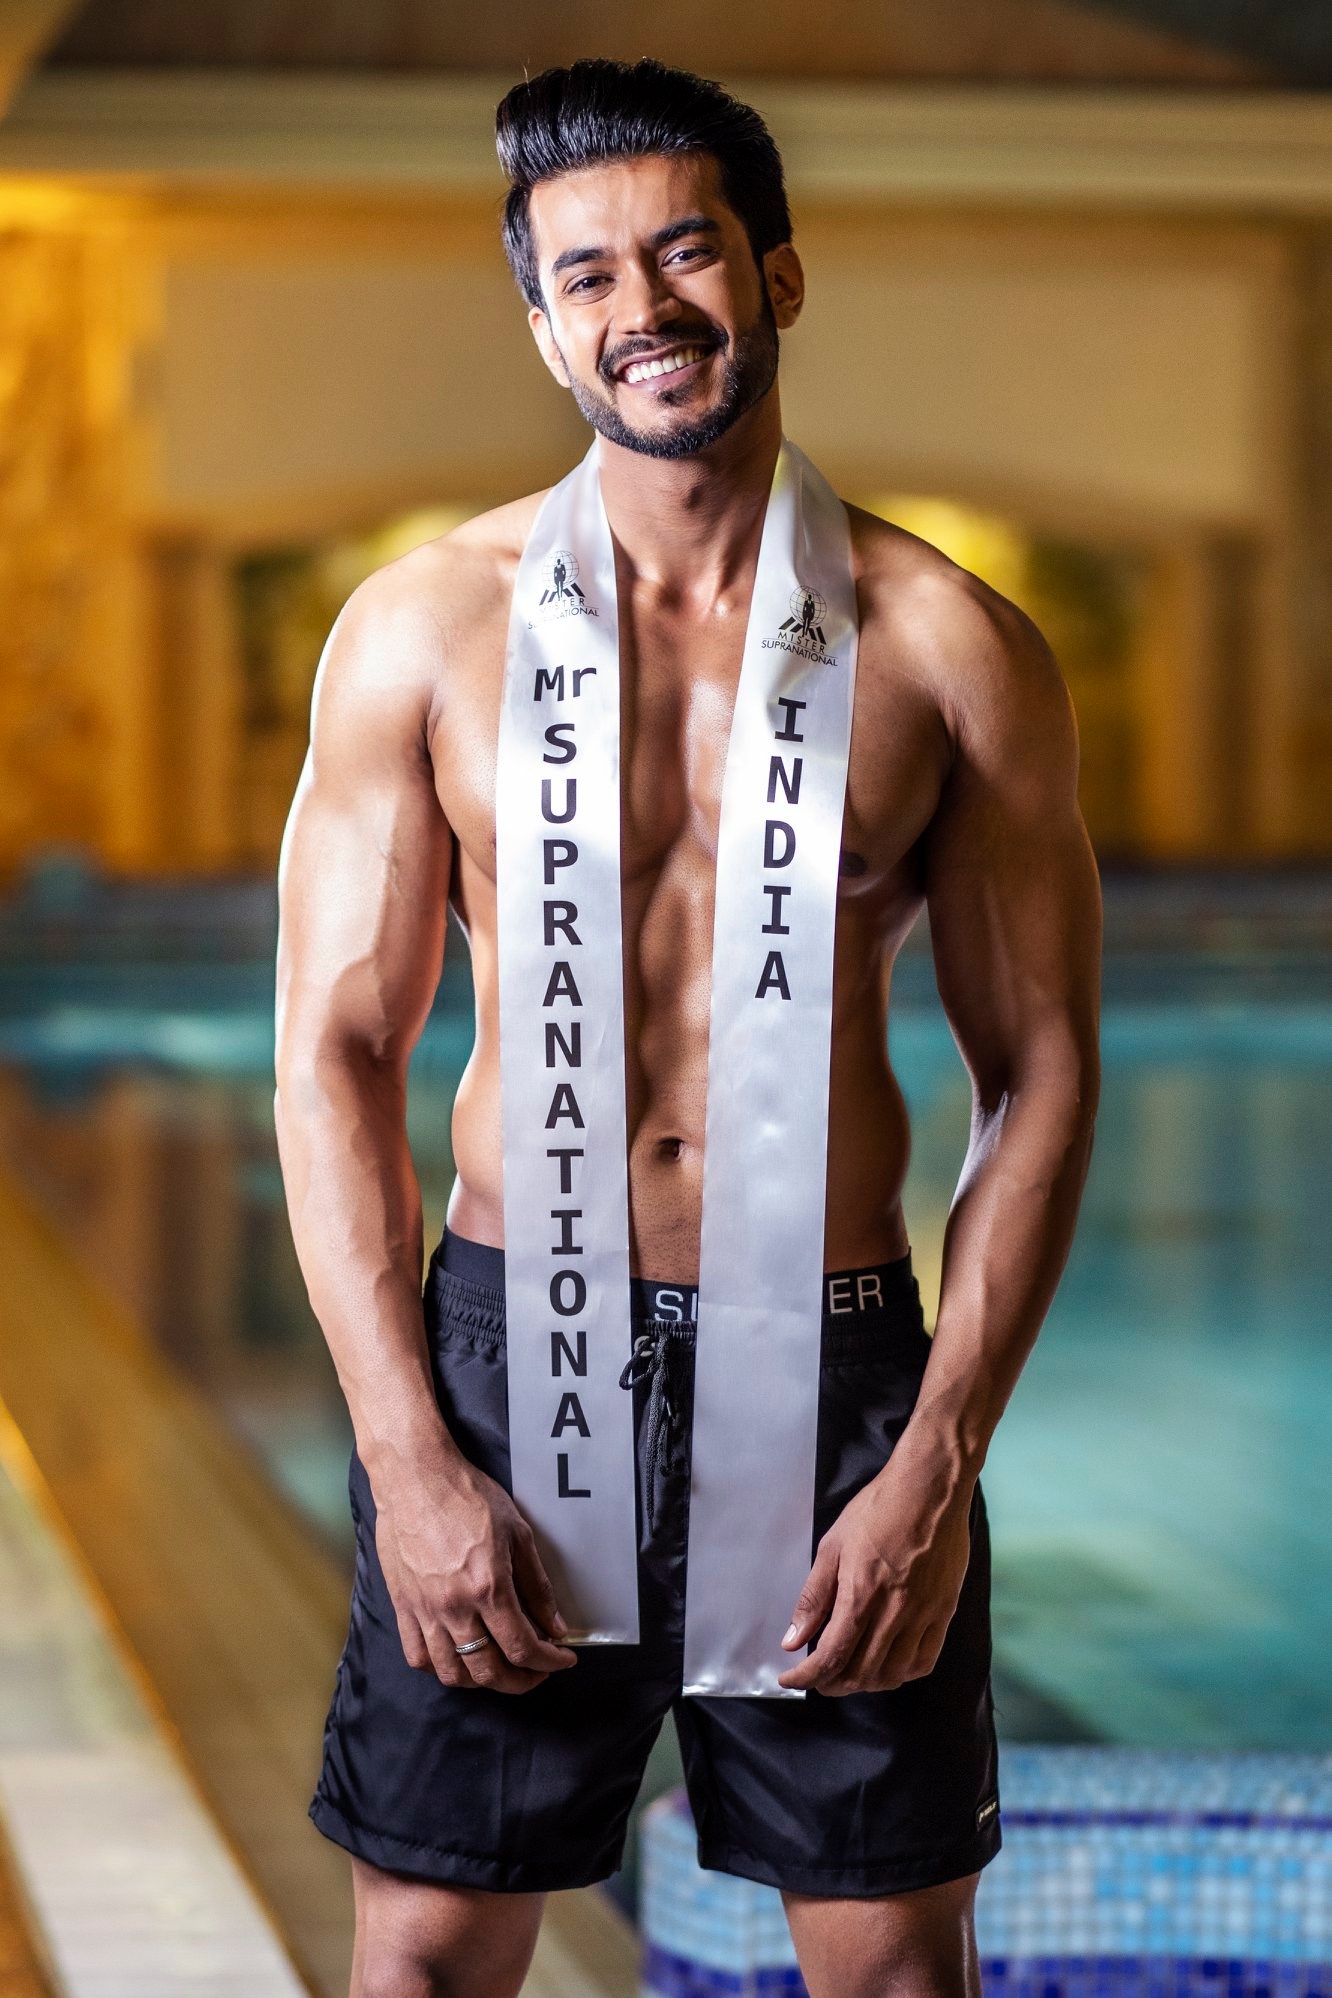 Mister Supranational 2019 Official Swimwear 115